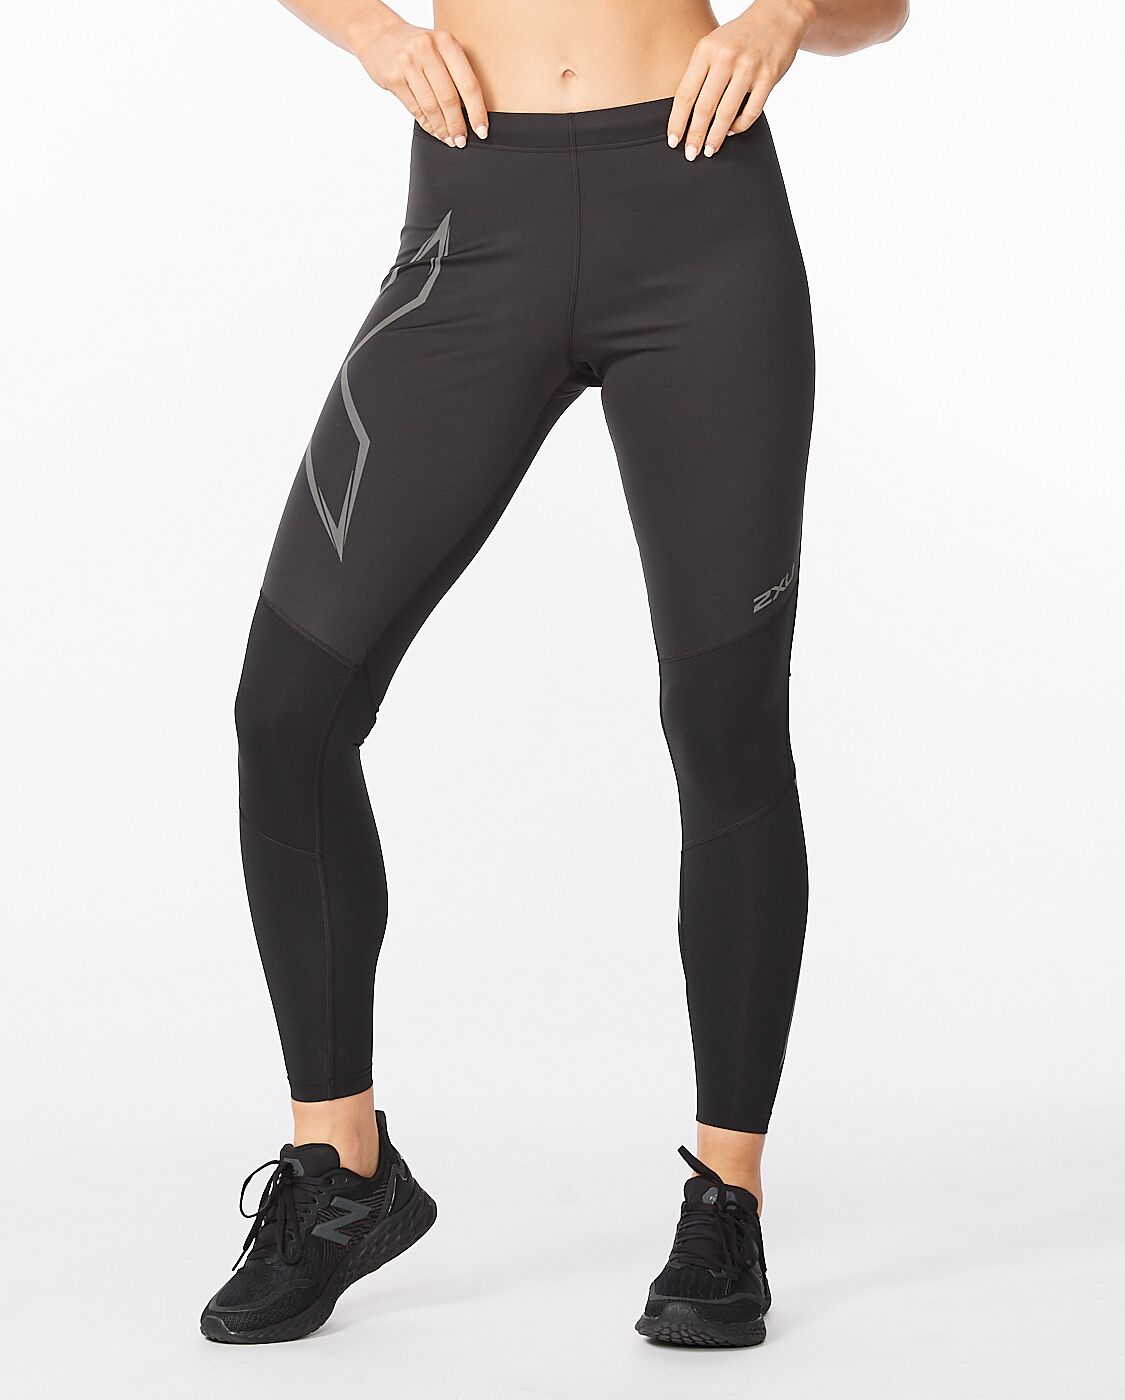 historie stor skuffe Ignition Shield Compression Tights – 2XU